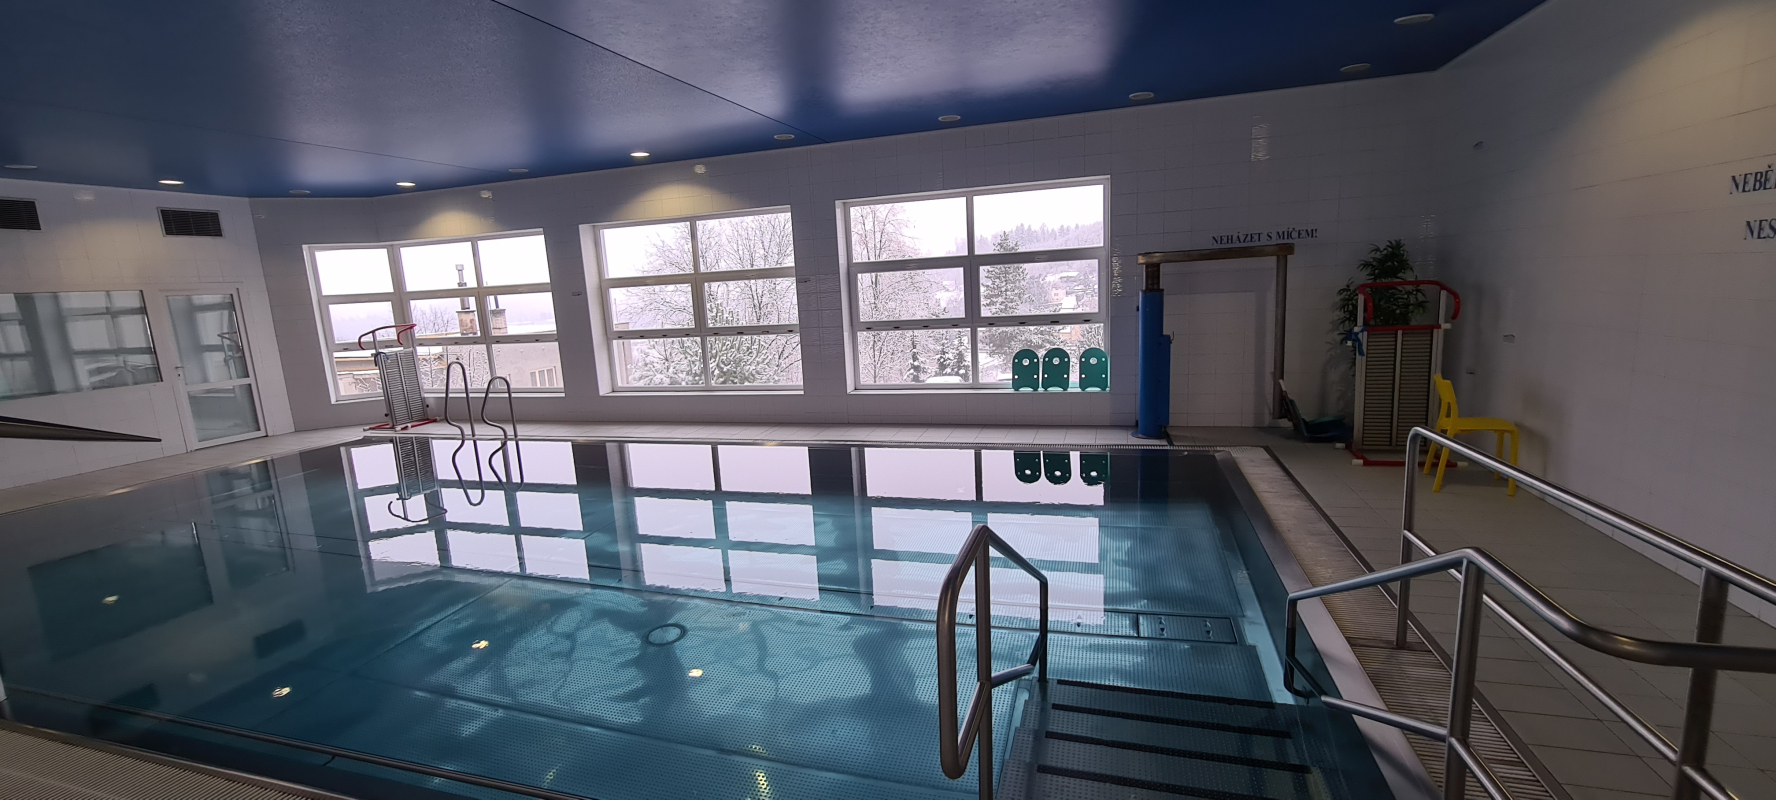 RECONSTRUCTION AFTER THE ACCIDENT OF INDOOR POOL